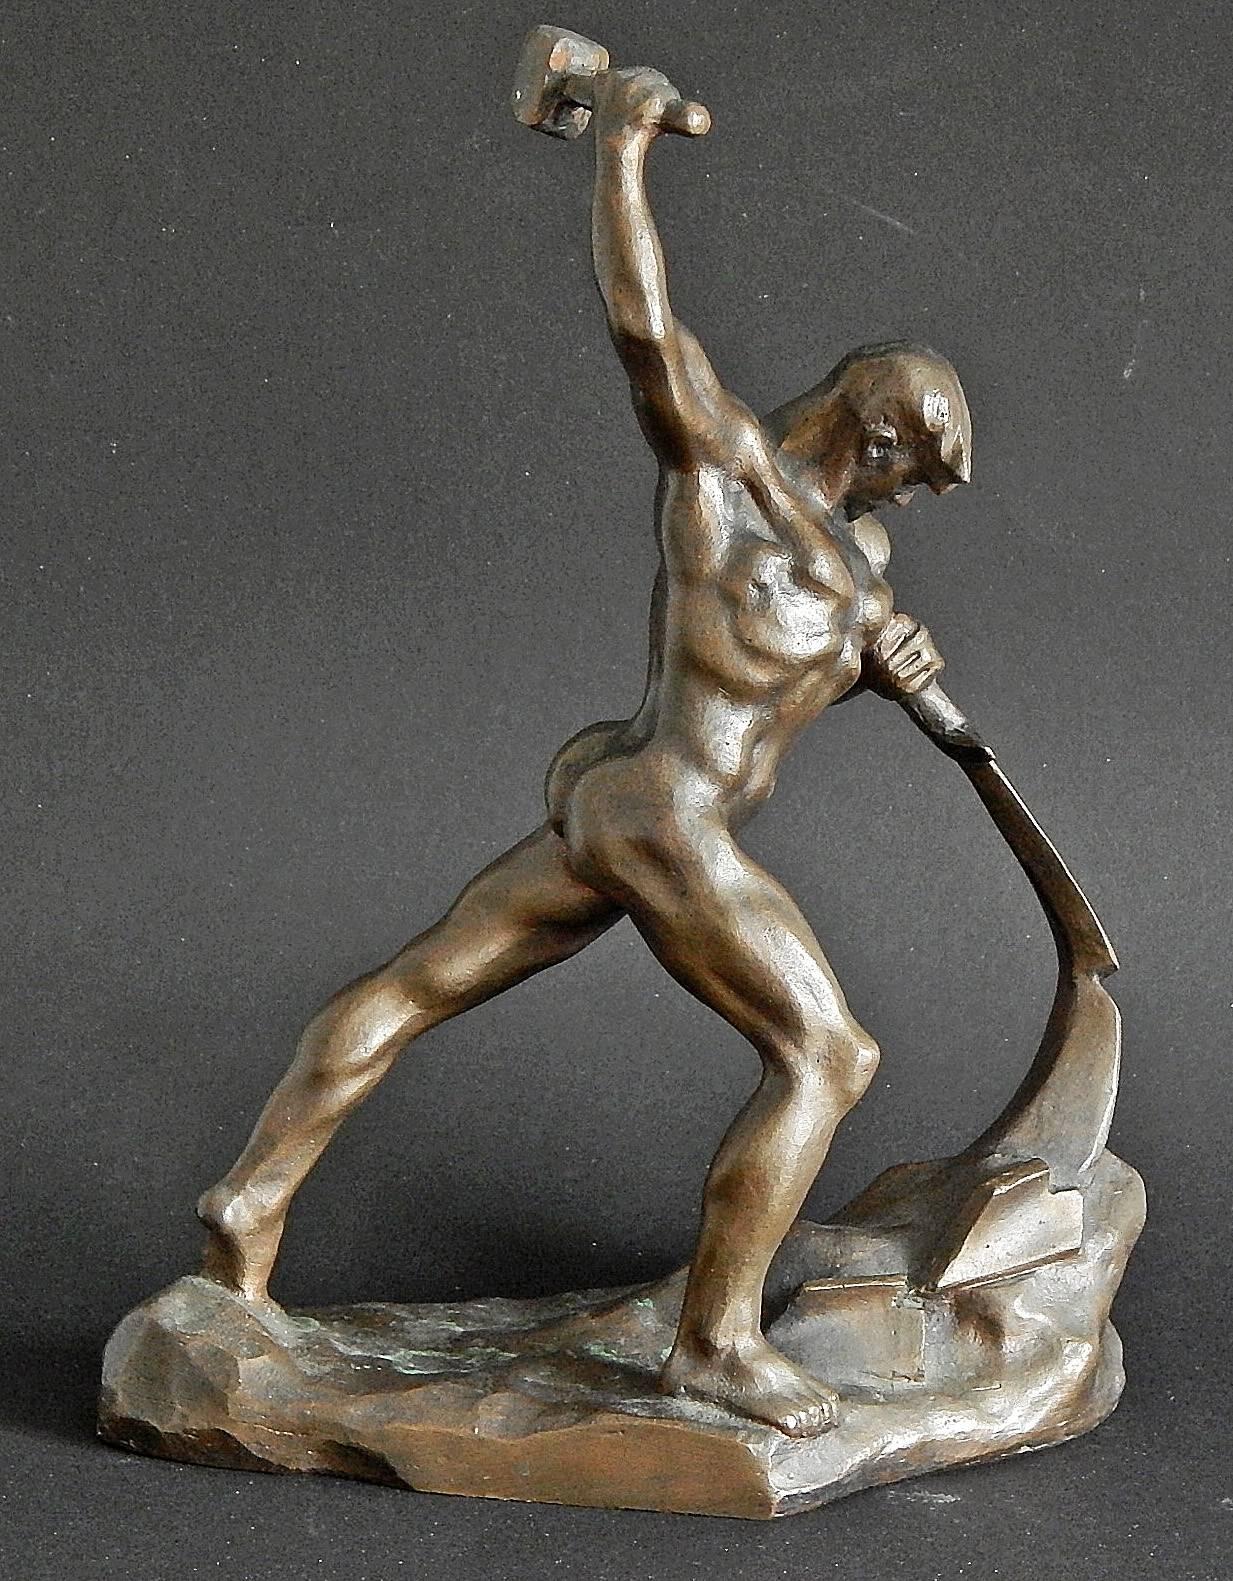 This very fine bronze sculpture, depicting a nude male figure dramatically beating a sword into a plow, is a reduced version of a famous sculpture given by Nikita Krushchev, Premier of the Soviet Union, to the United Nations as a gesture of peace in